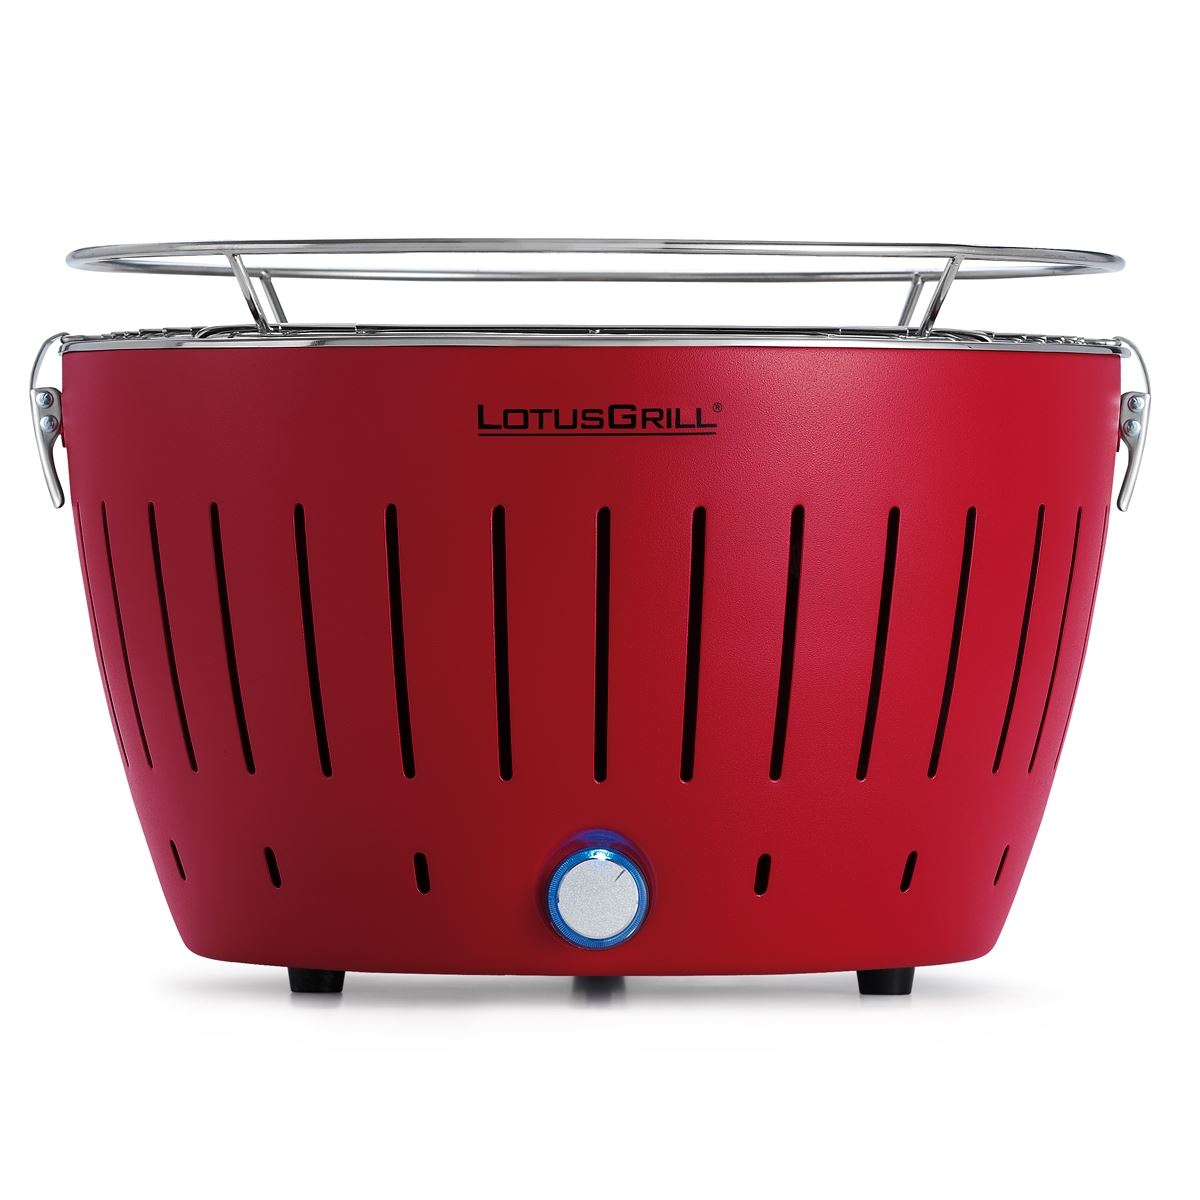 What can you cook on a LotusGrill?